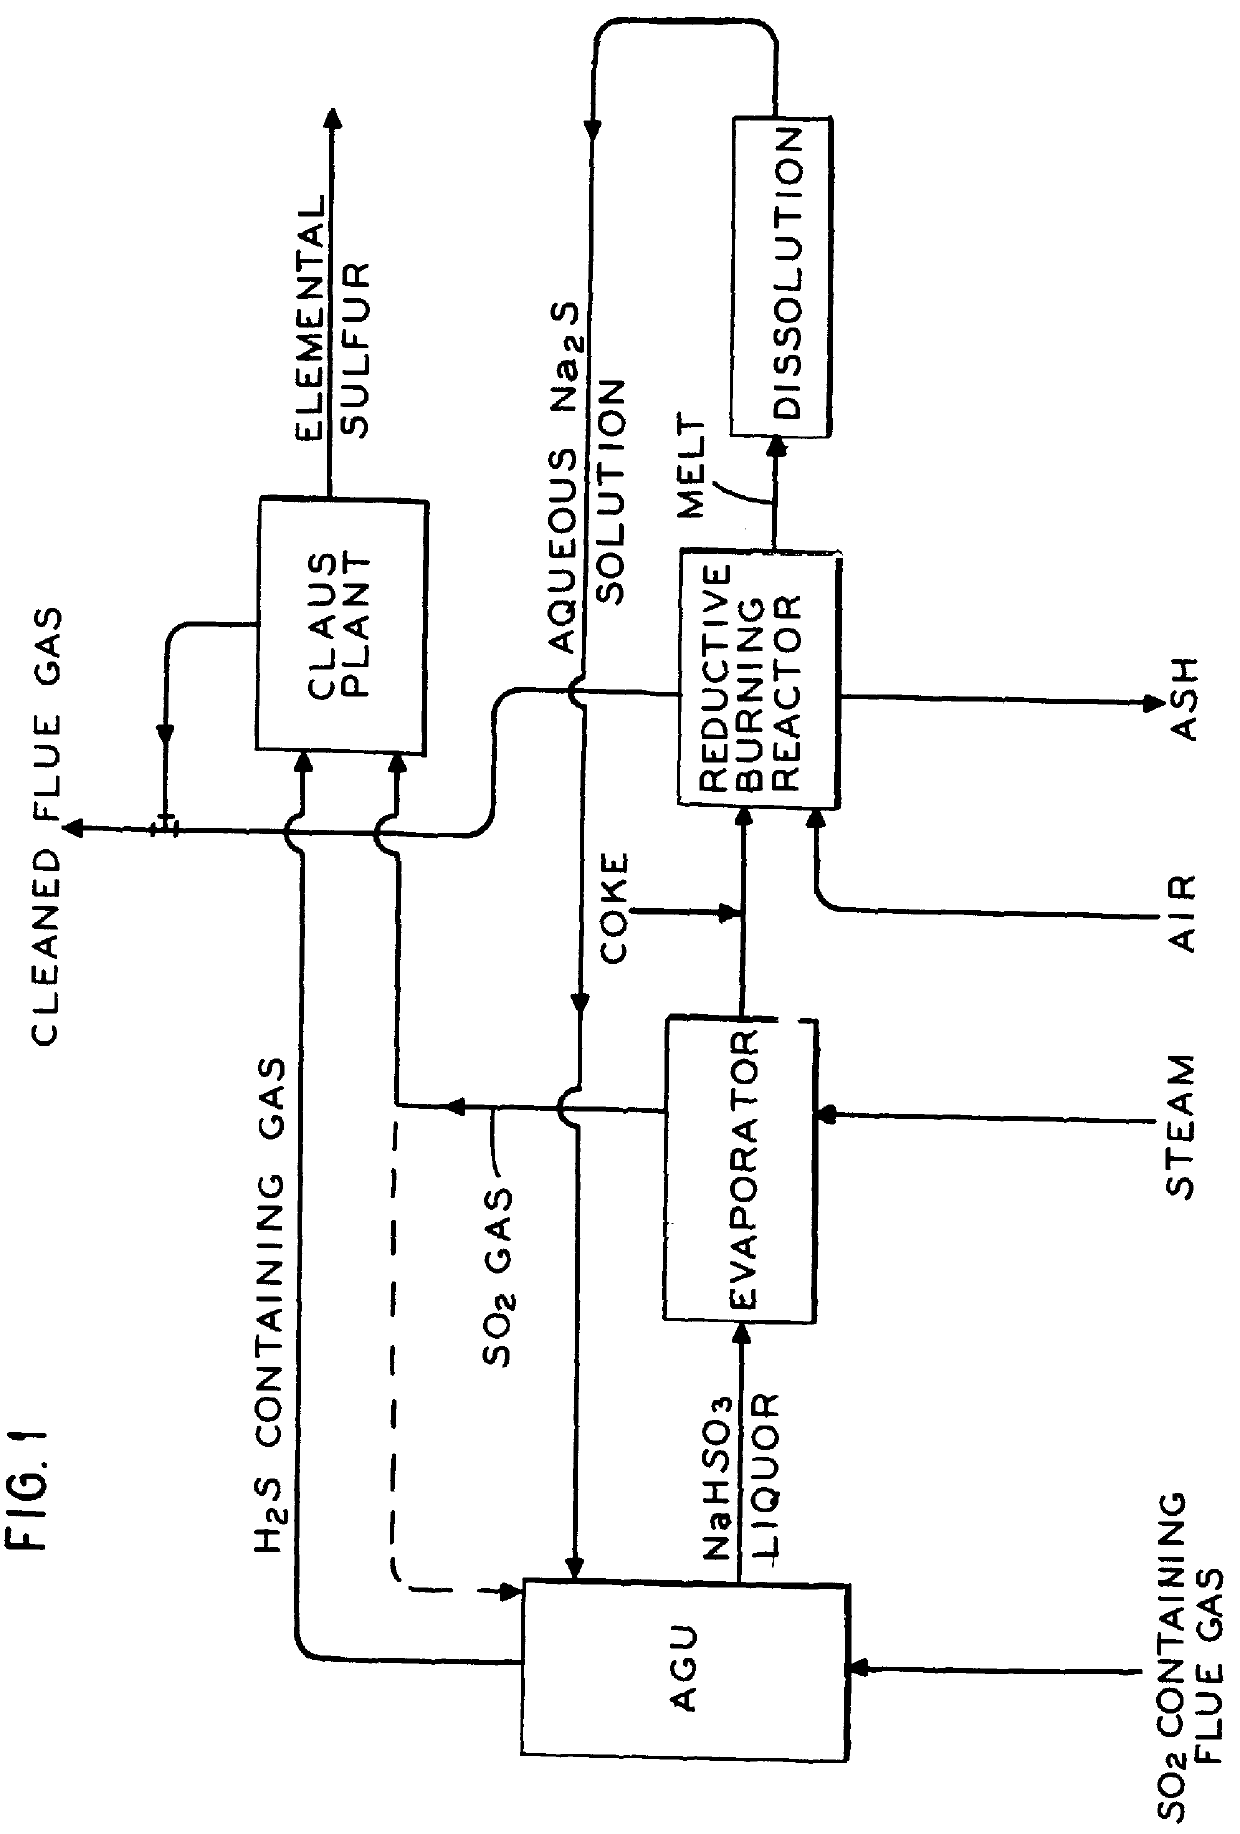 Process for the desulfurization of sulfur dioxide-containing gases